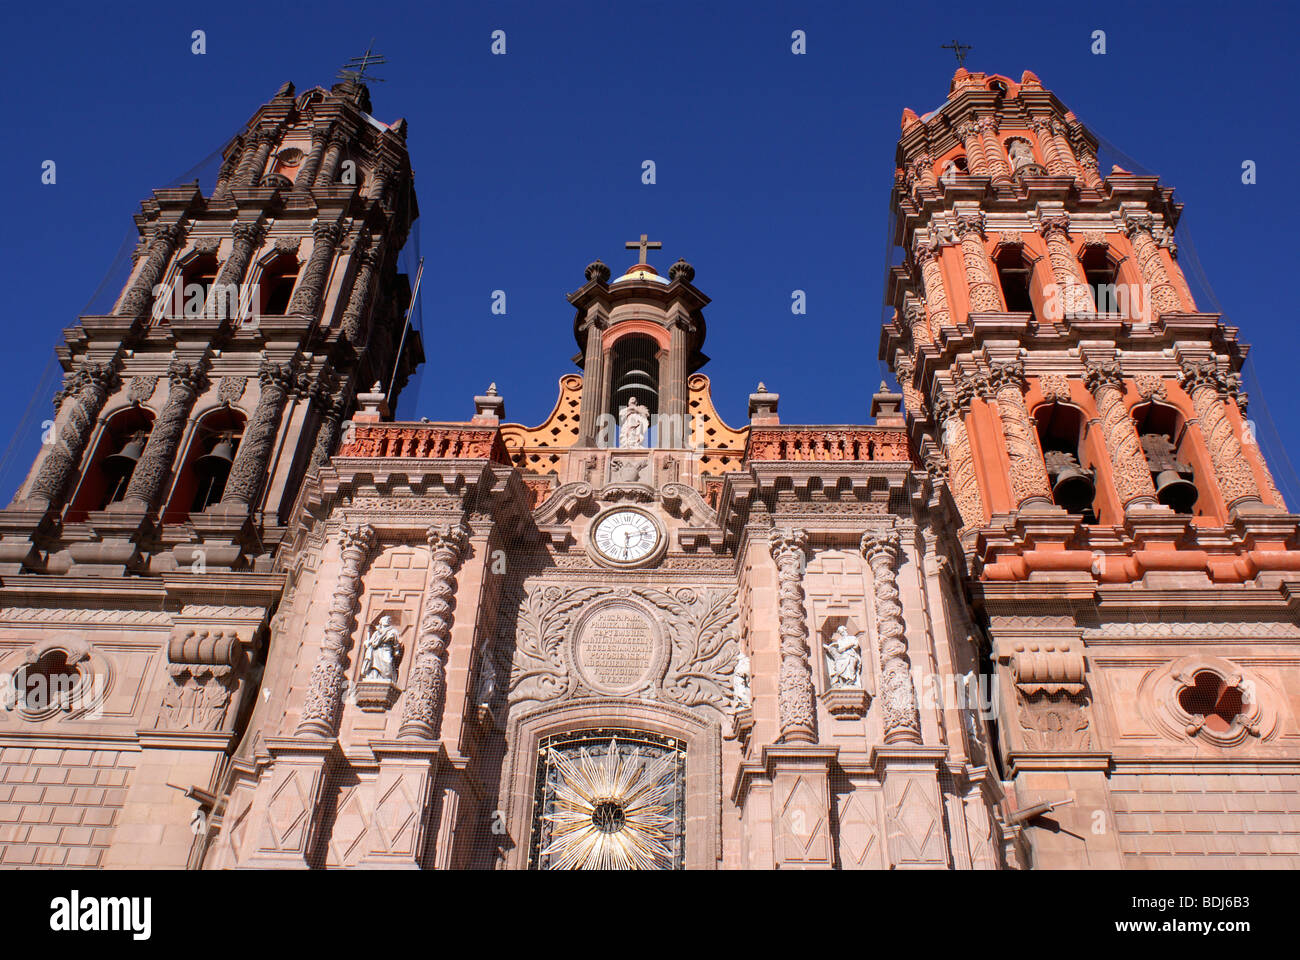 Facade of the baroque style cathedral in the city of San Luis Potosi, Mexico Stock Photo